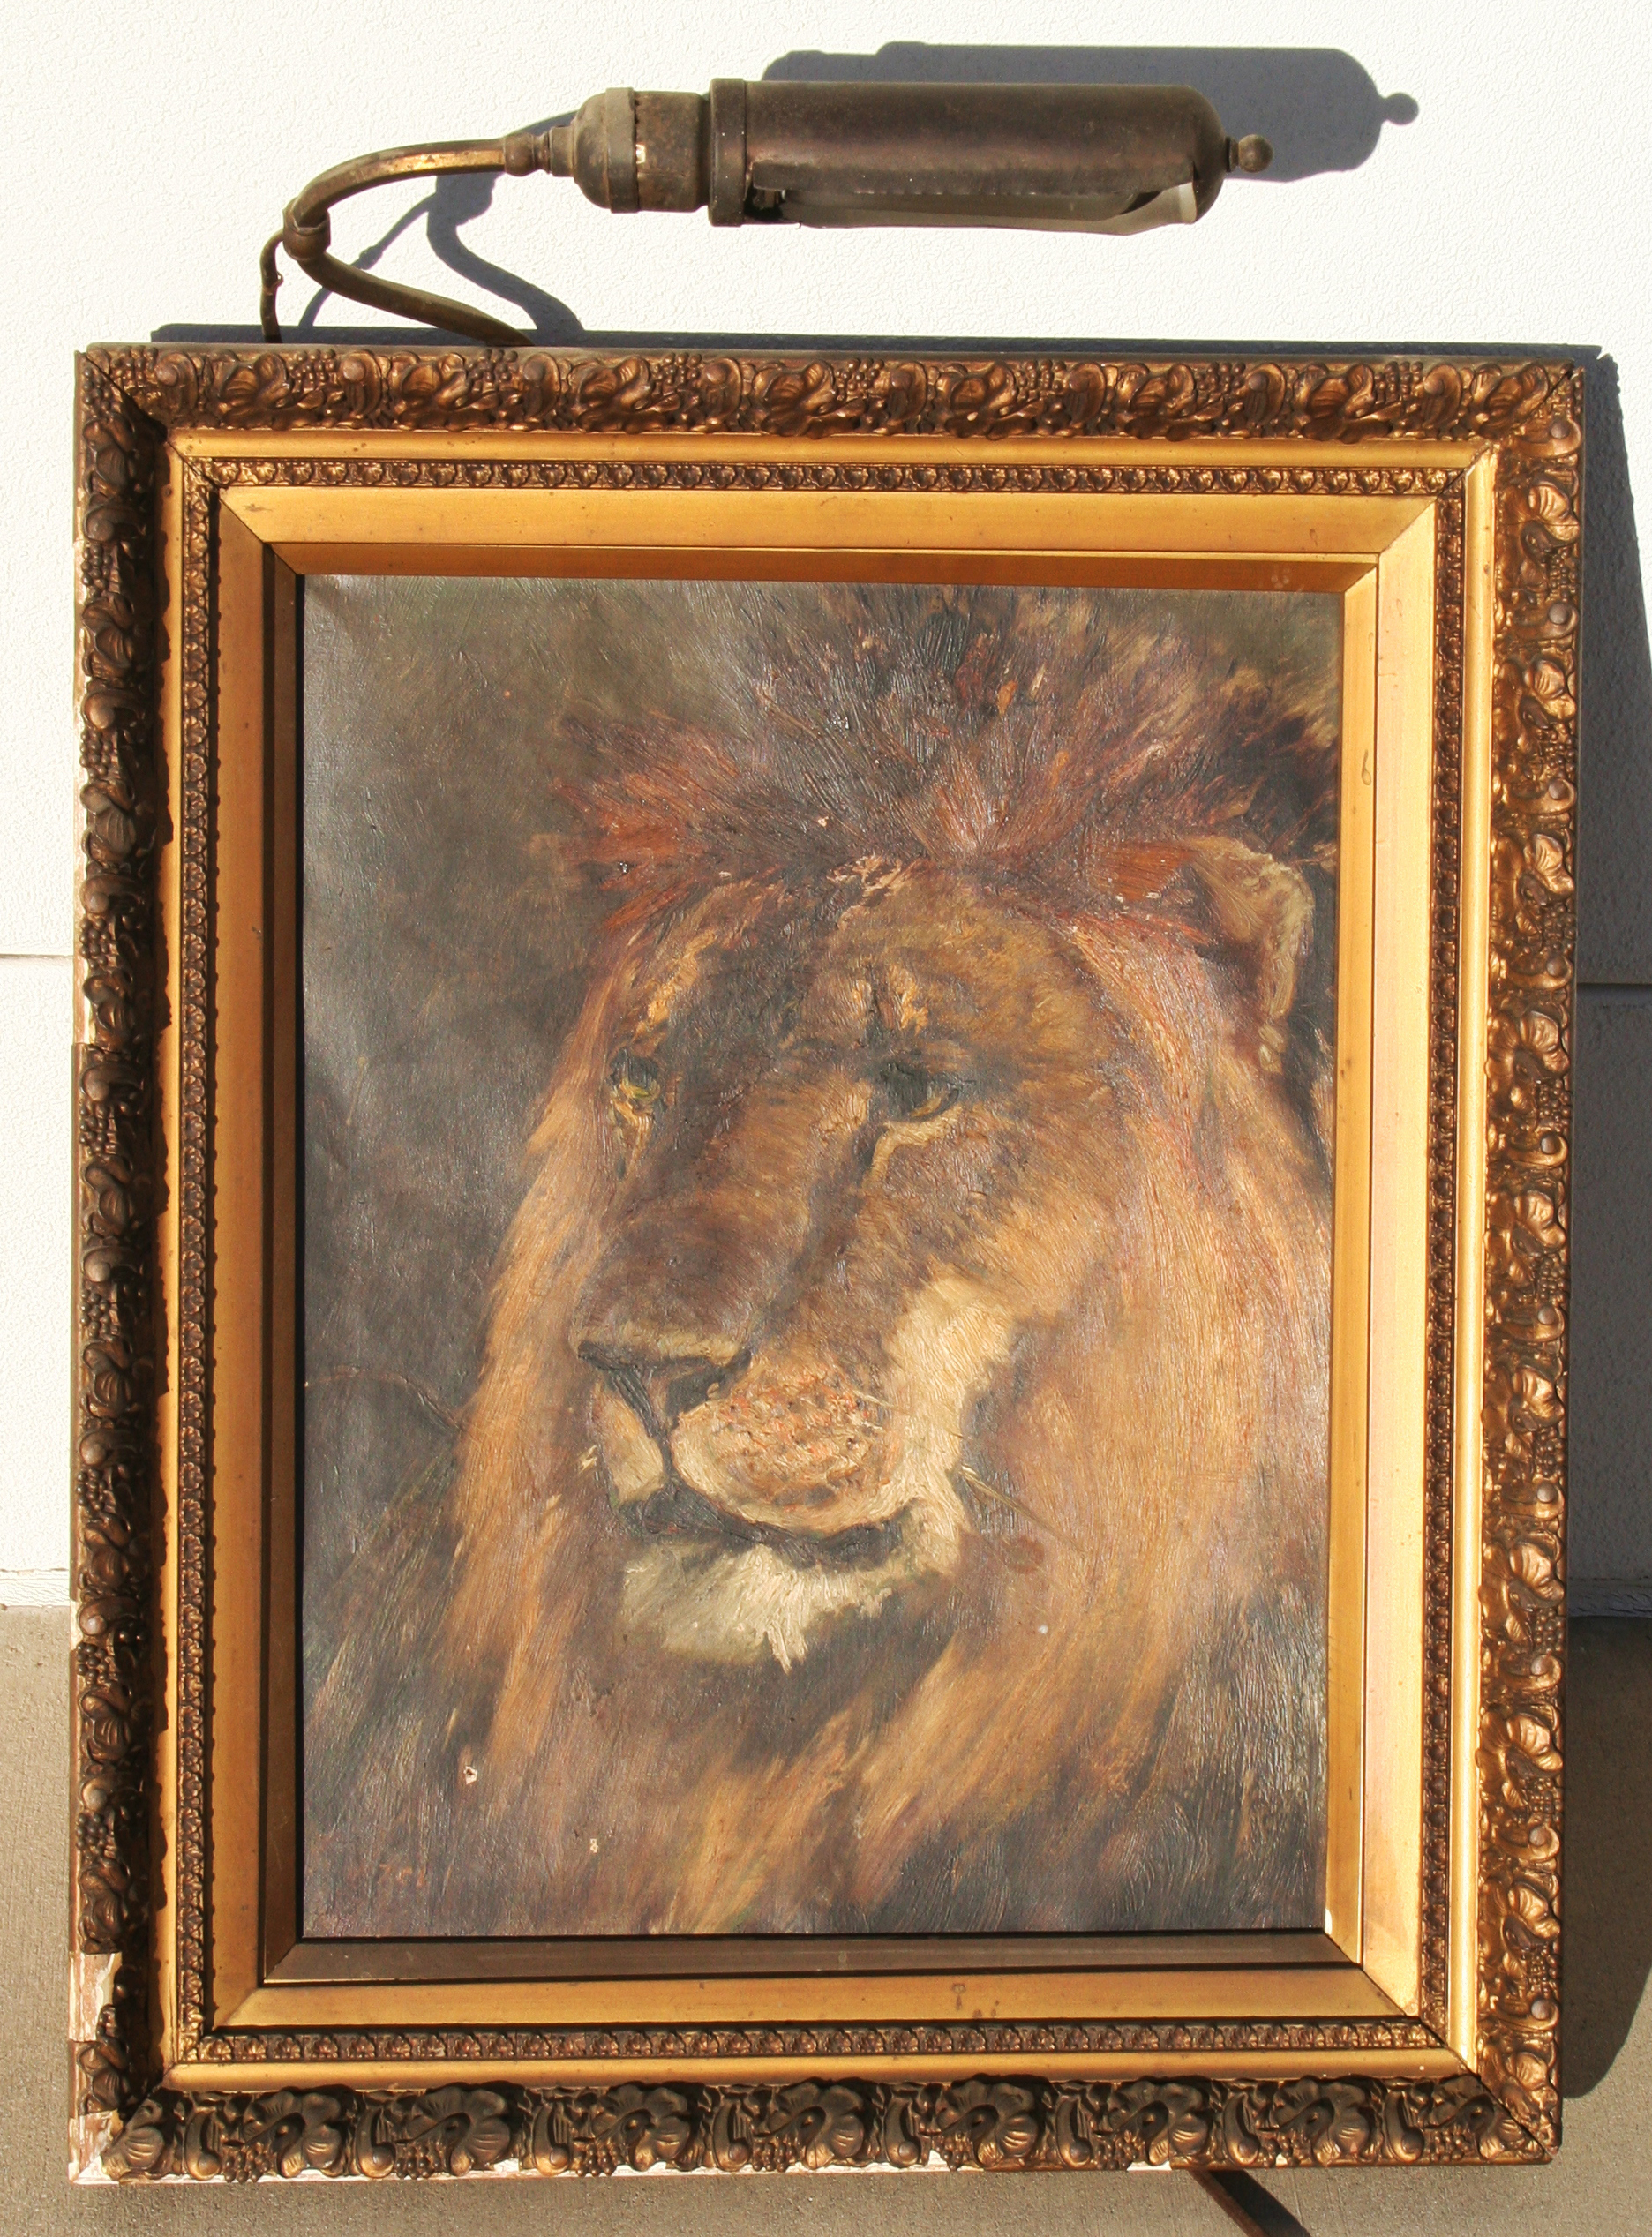 Painting of lion has been in family at least since my father was born (1933) as far as he knows.